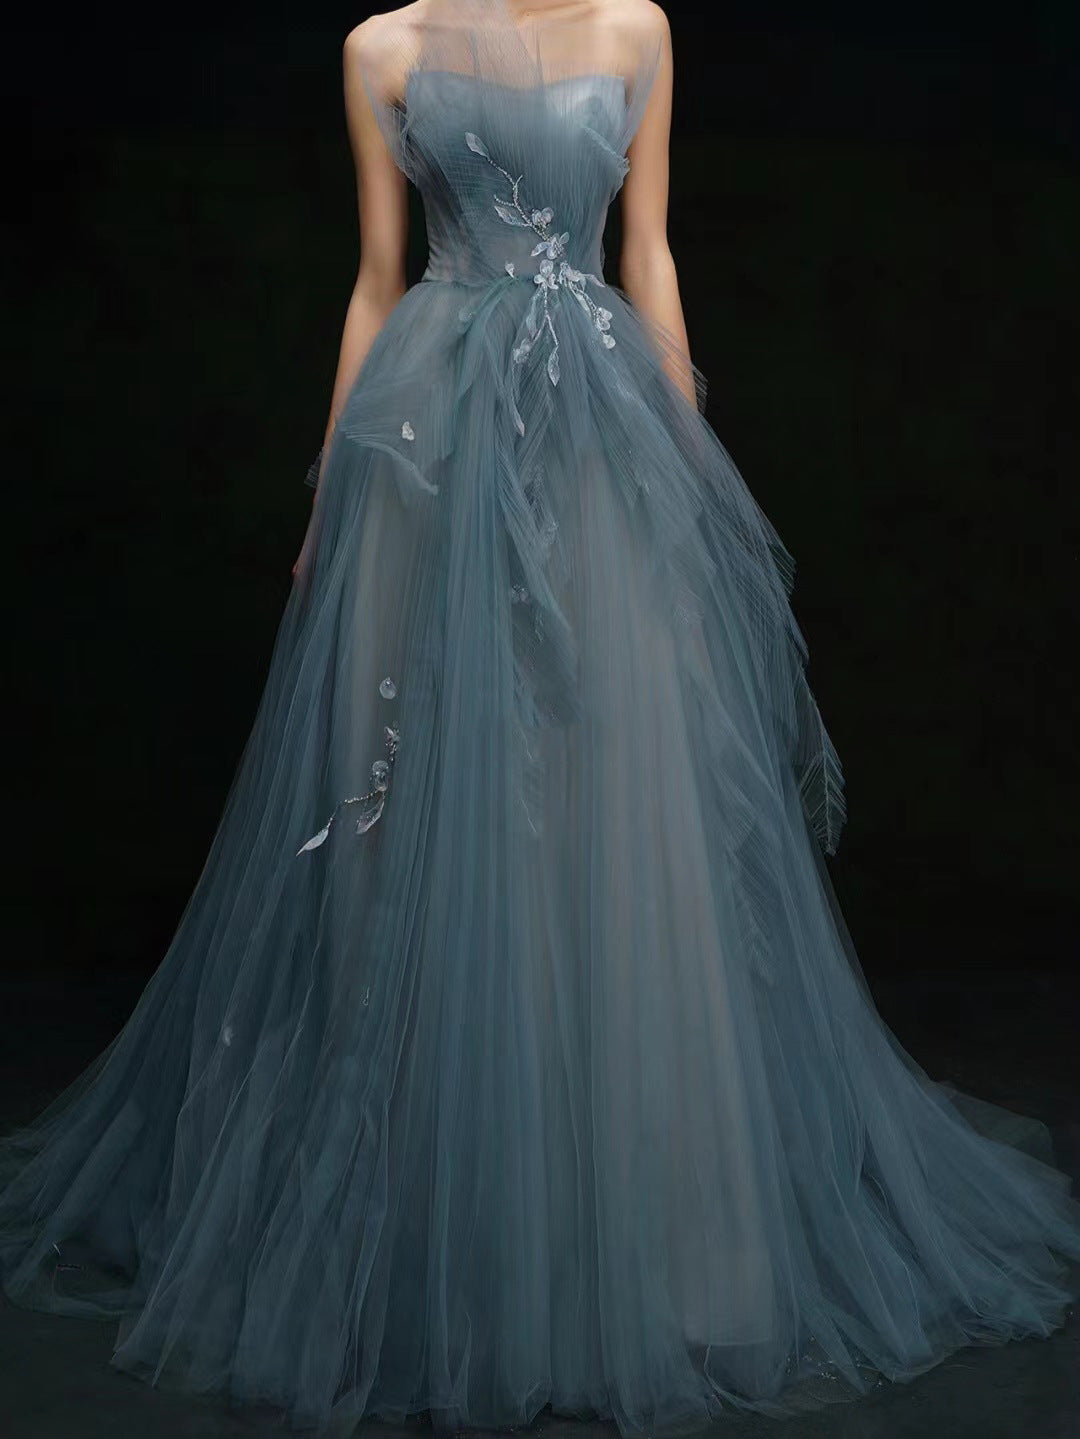 Strapless A Line Tulle Prom Dress Blue Evening Formal Party Gown 594